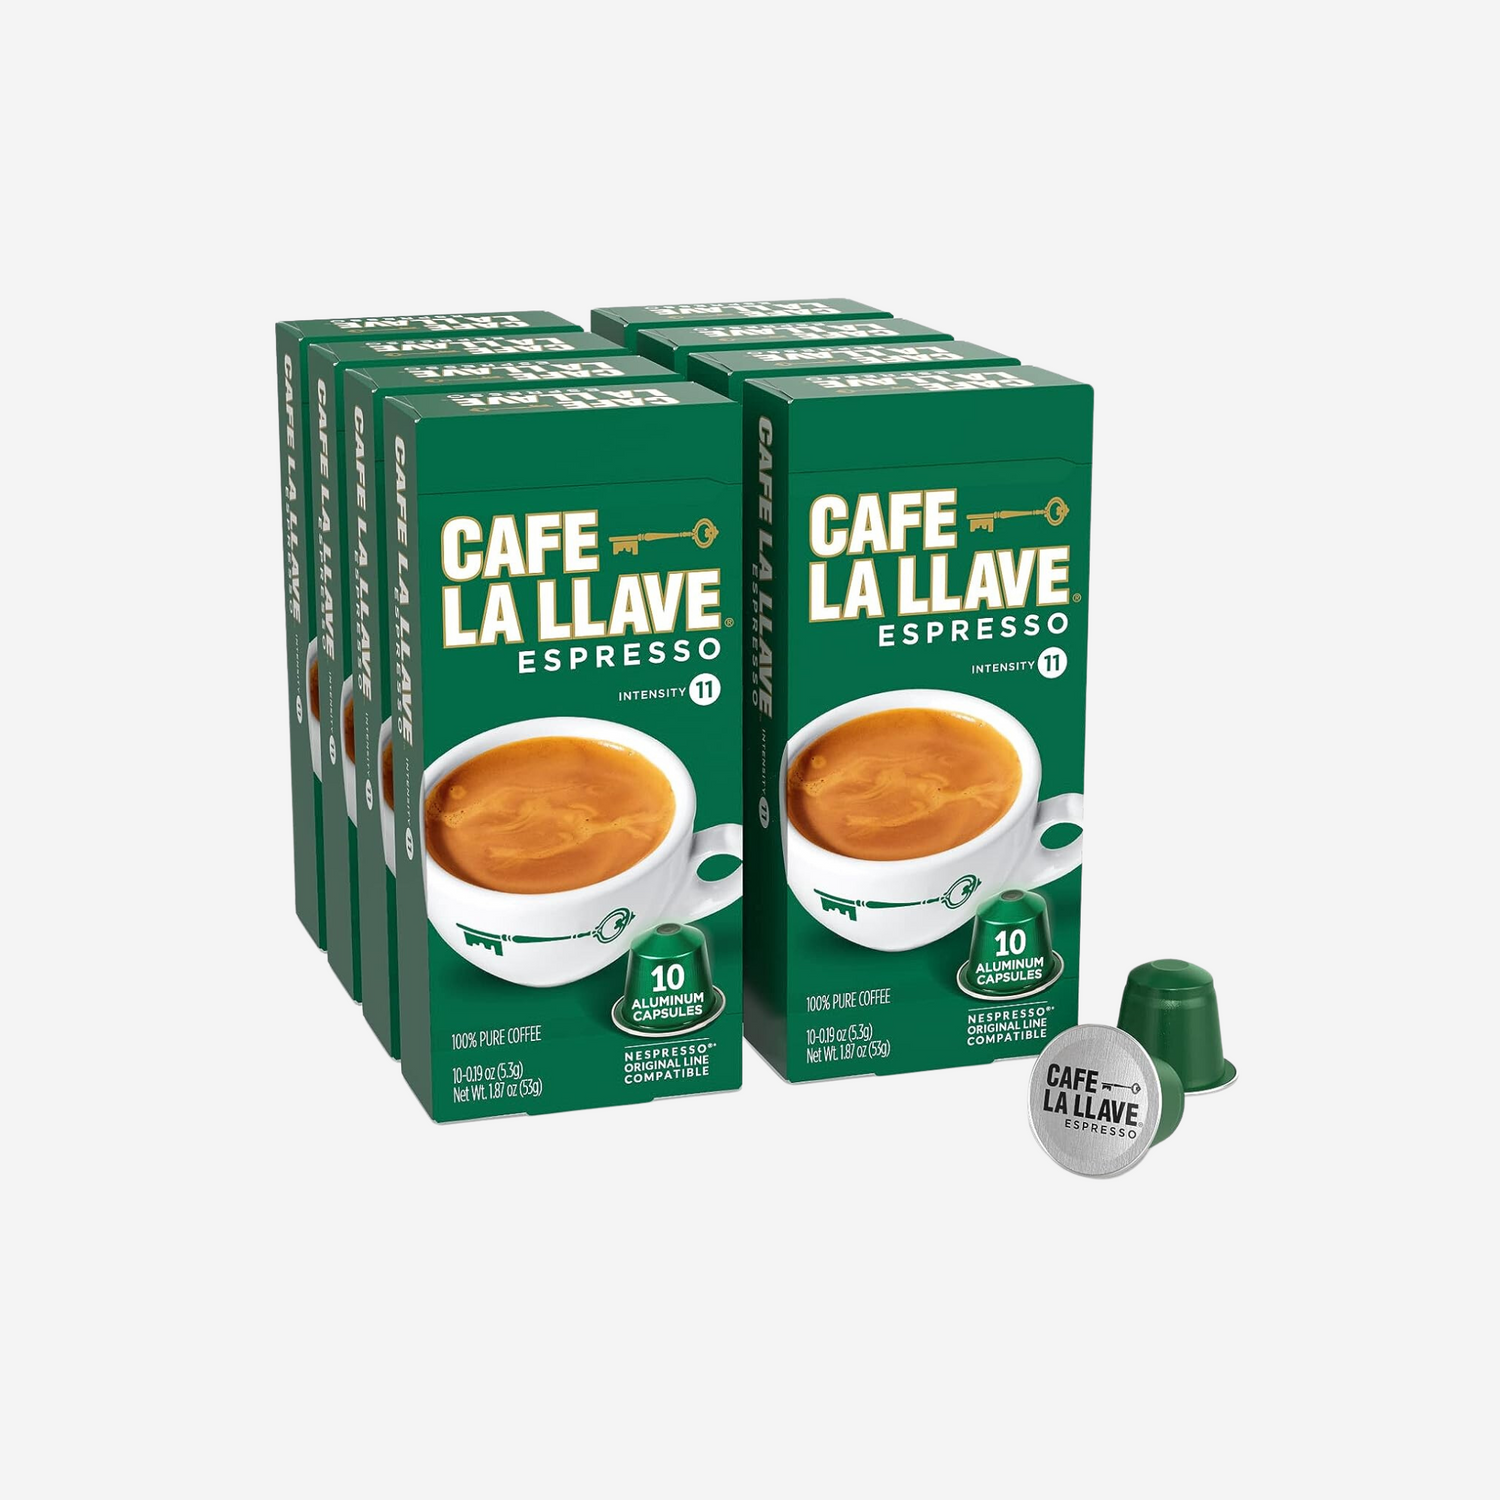 Cafe La Llave Espresso Capsules, Intensity 11-Recylable Coffee Pods (80 Count)